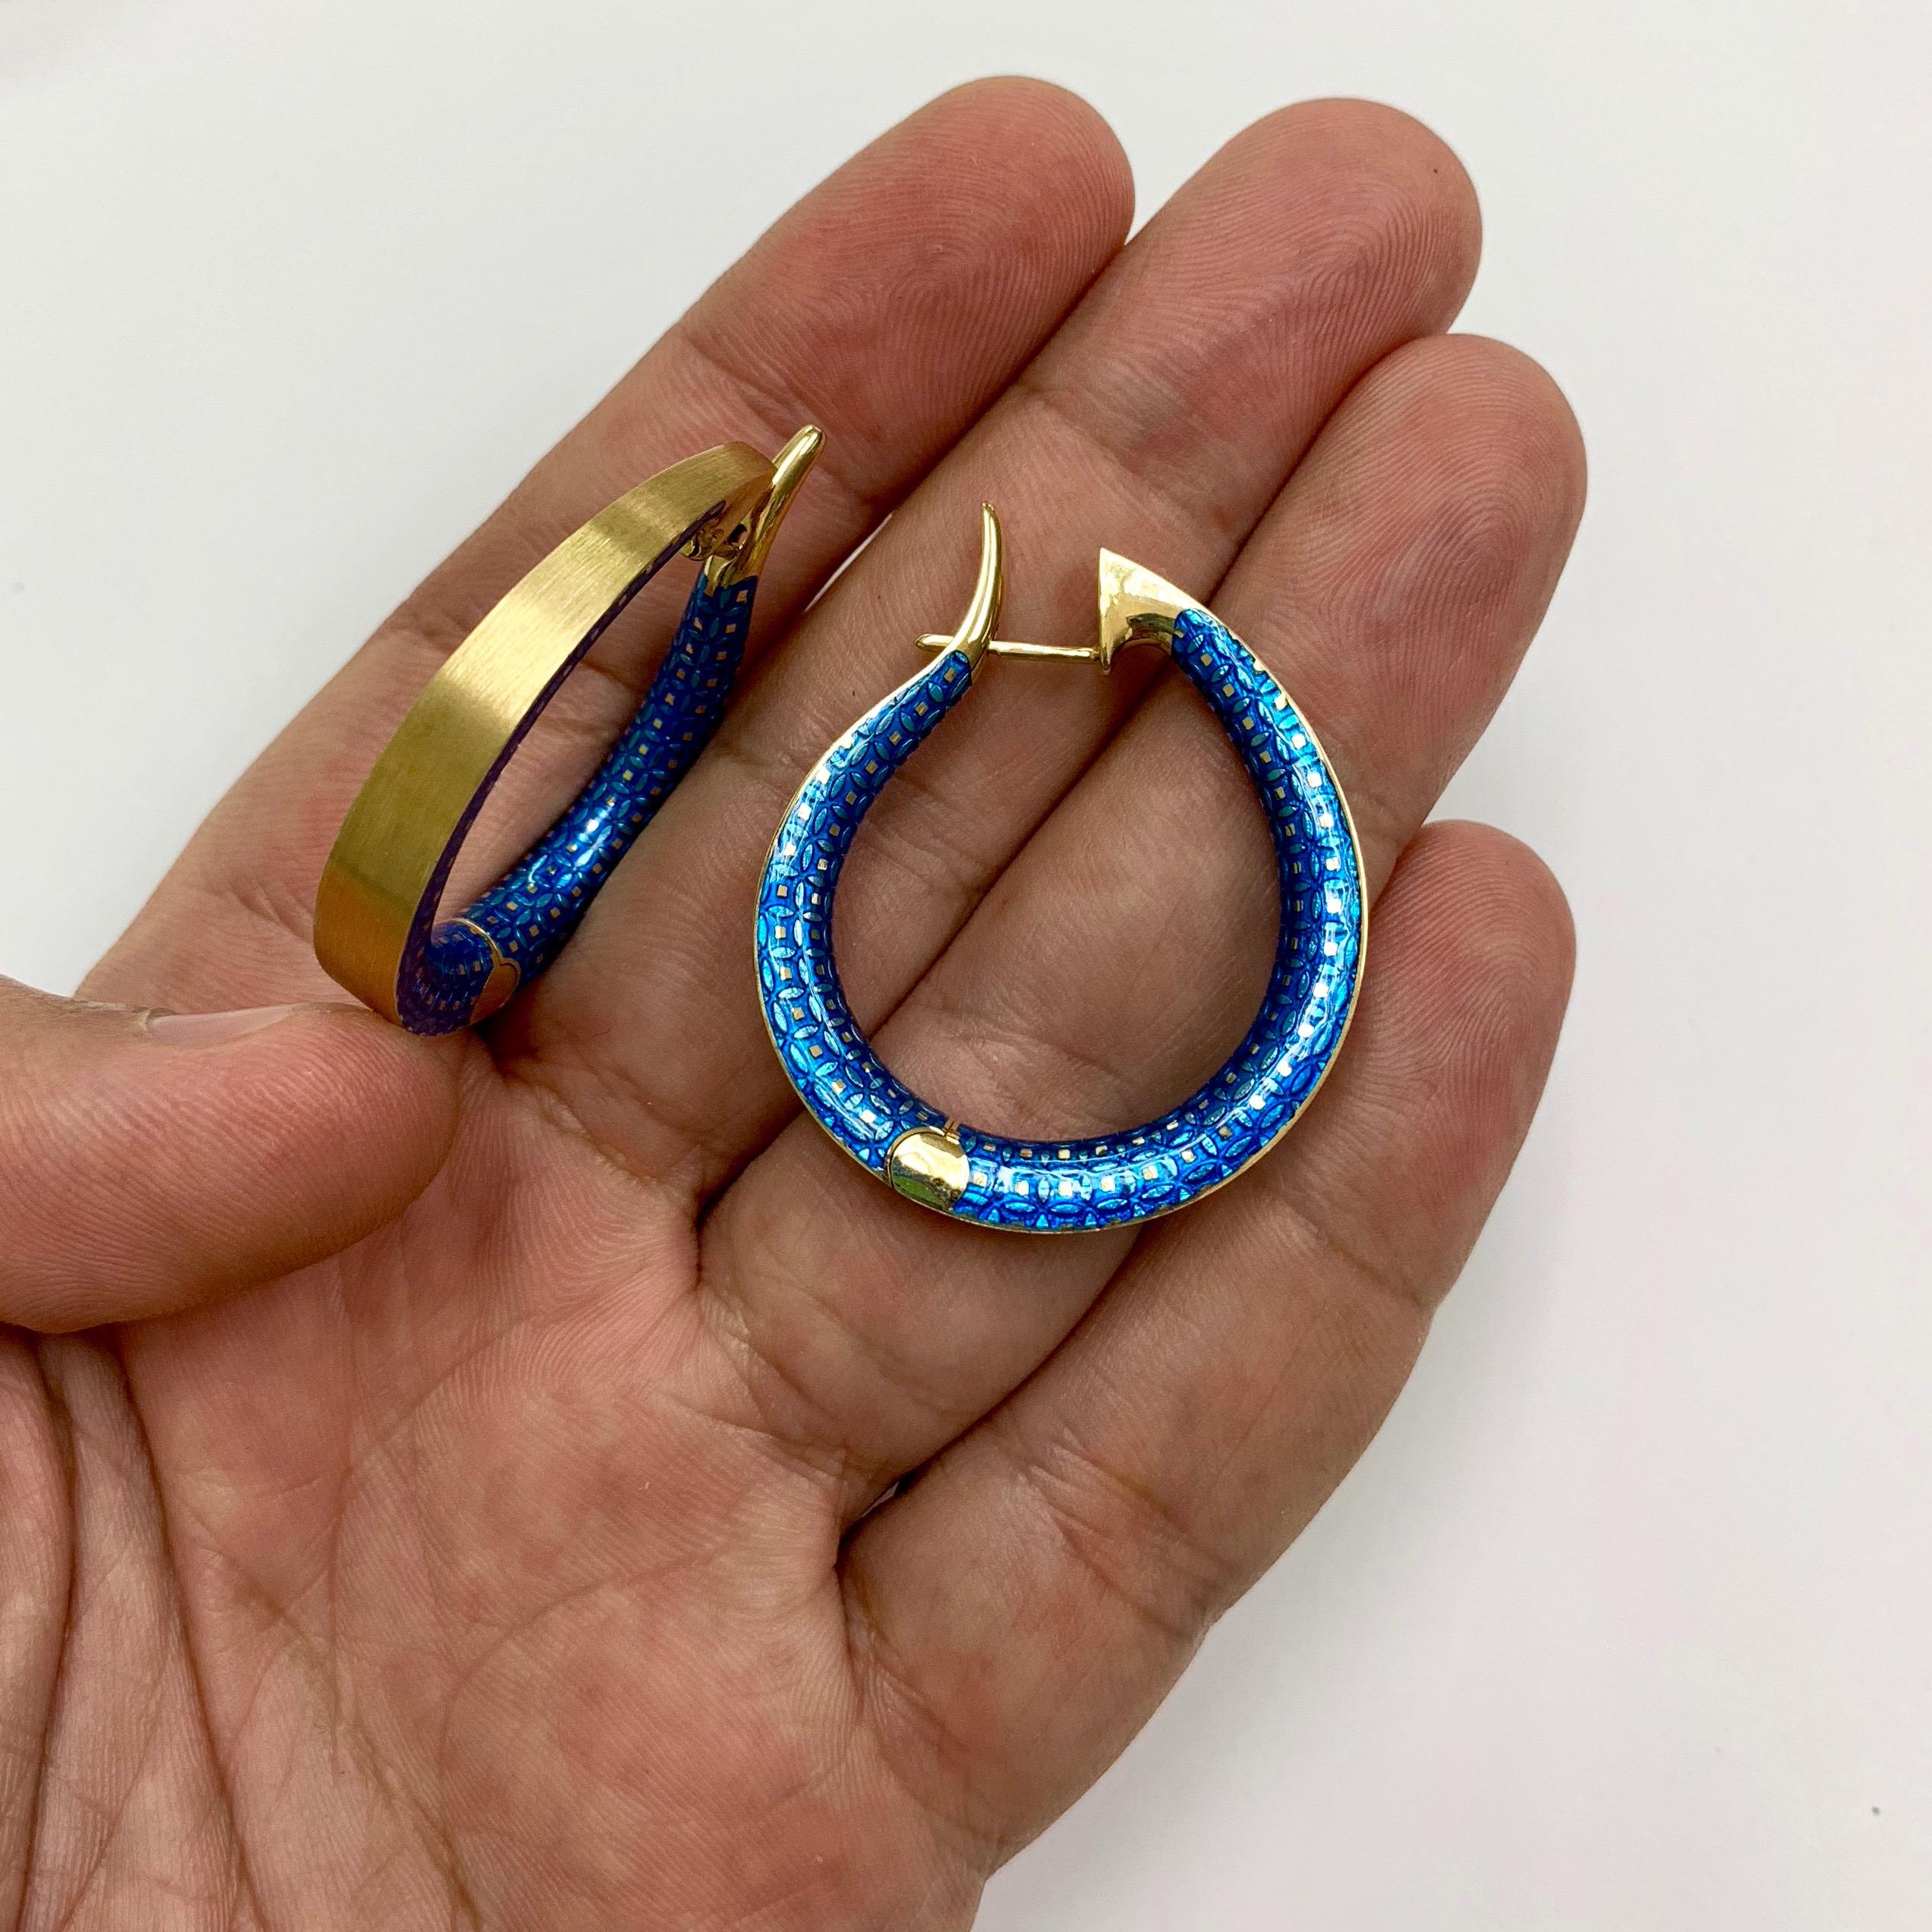 Blue Topaz Colored Enamel 18 Karat Yellow Gold Ring Earrings Bangle Suite For Sale 6